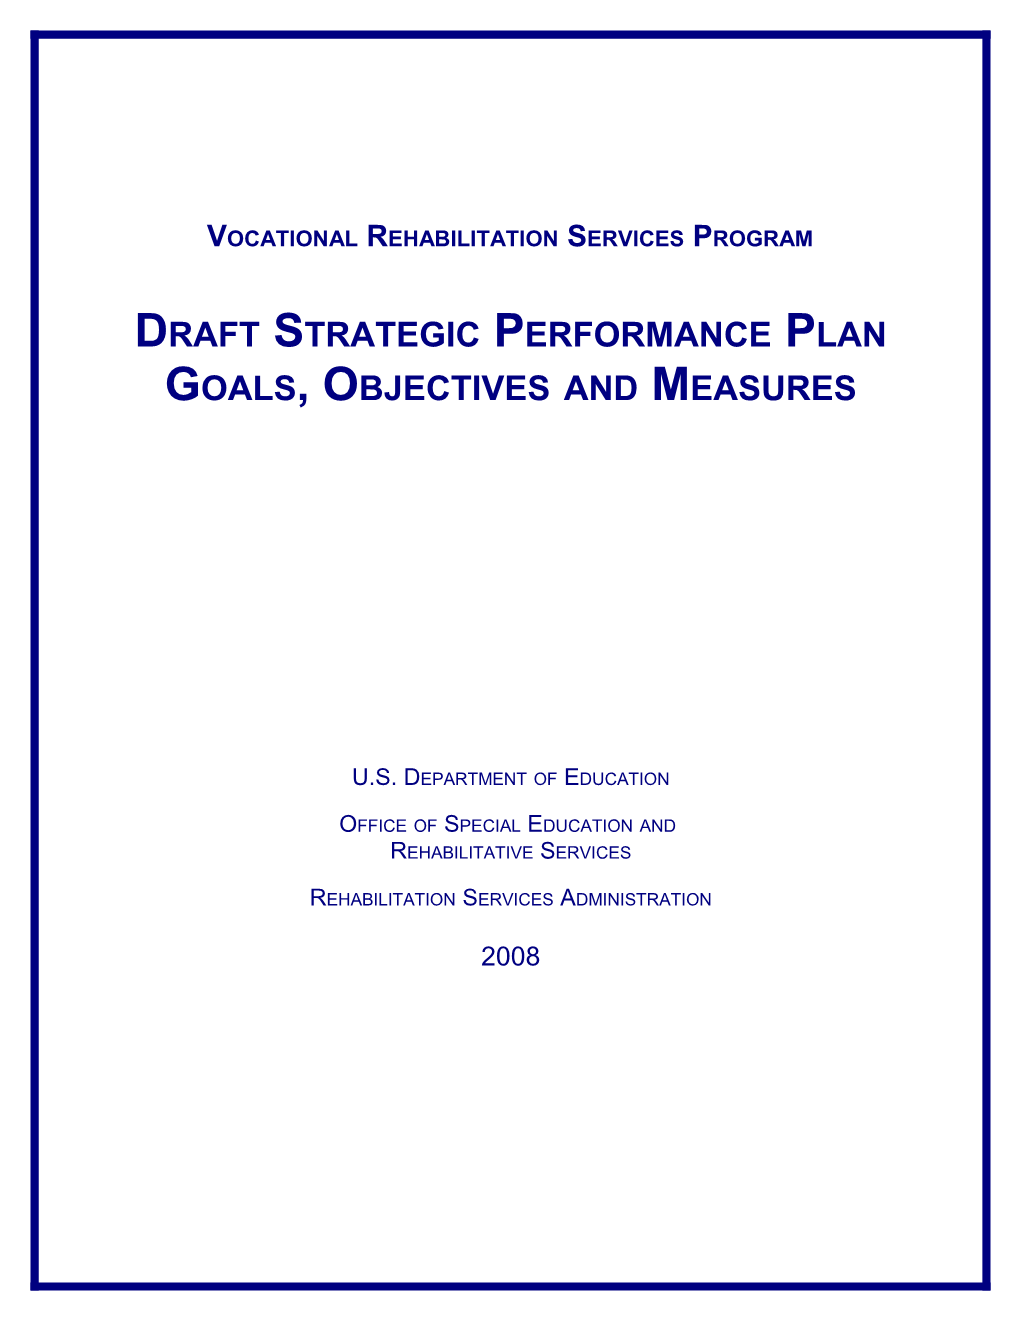 Draft Strategic Performance Plan Goals, Objectives and Measures (MS Word)